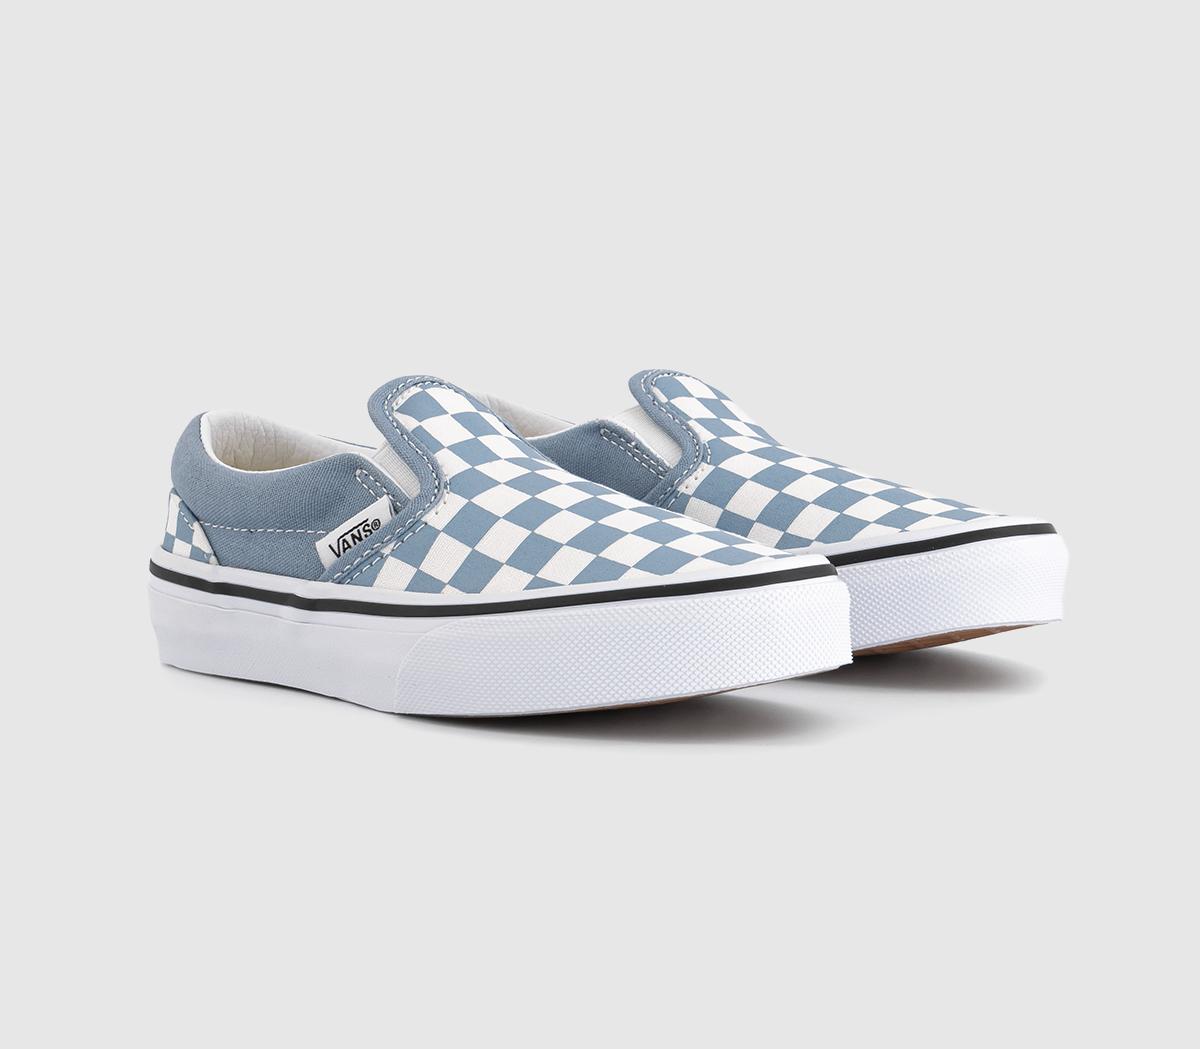 Vans Classic Slip On Kids Color Theory Checkerboard Dusty Blue, 1 Youth